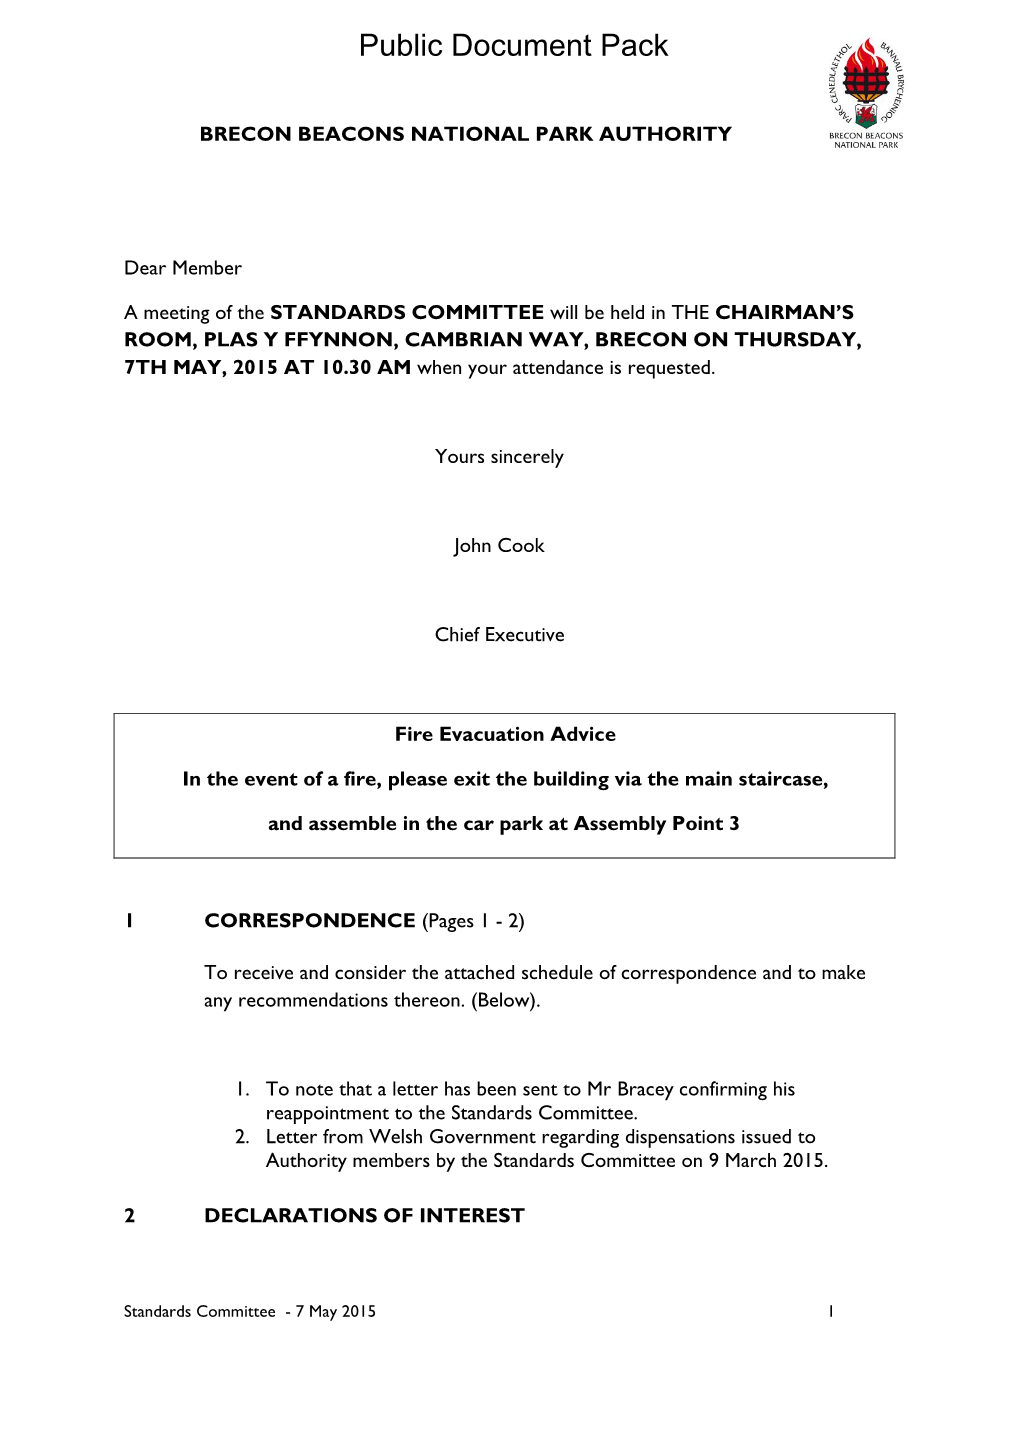 (Public Pack)Agenda Document for Standards Committee, 07/05/2015